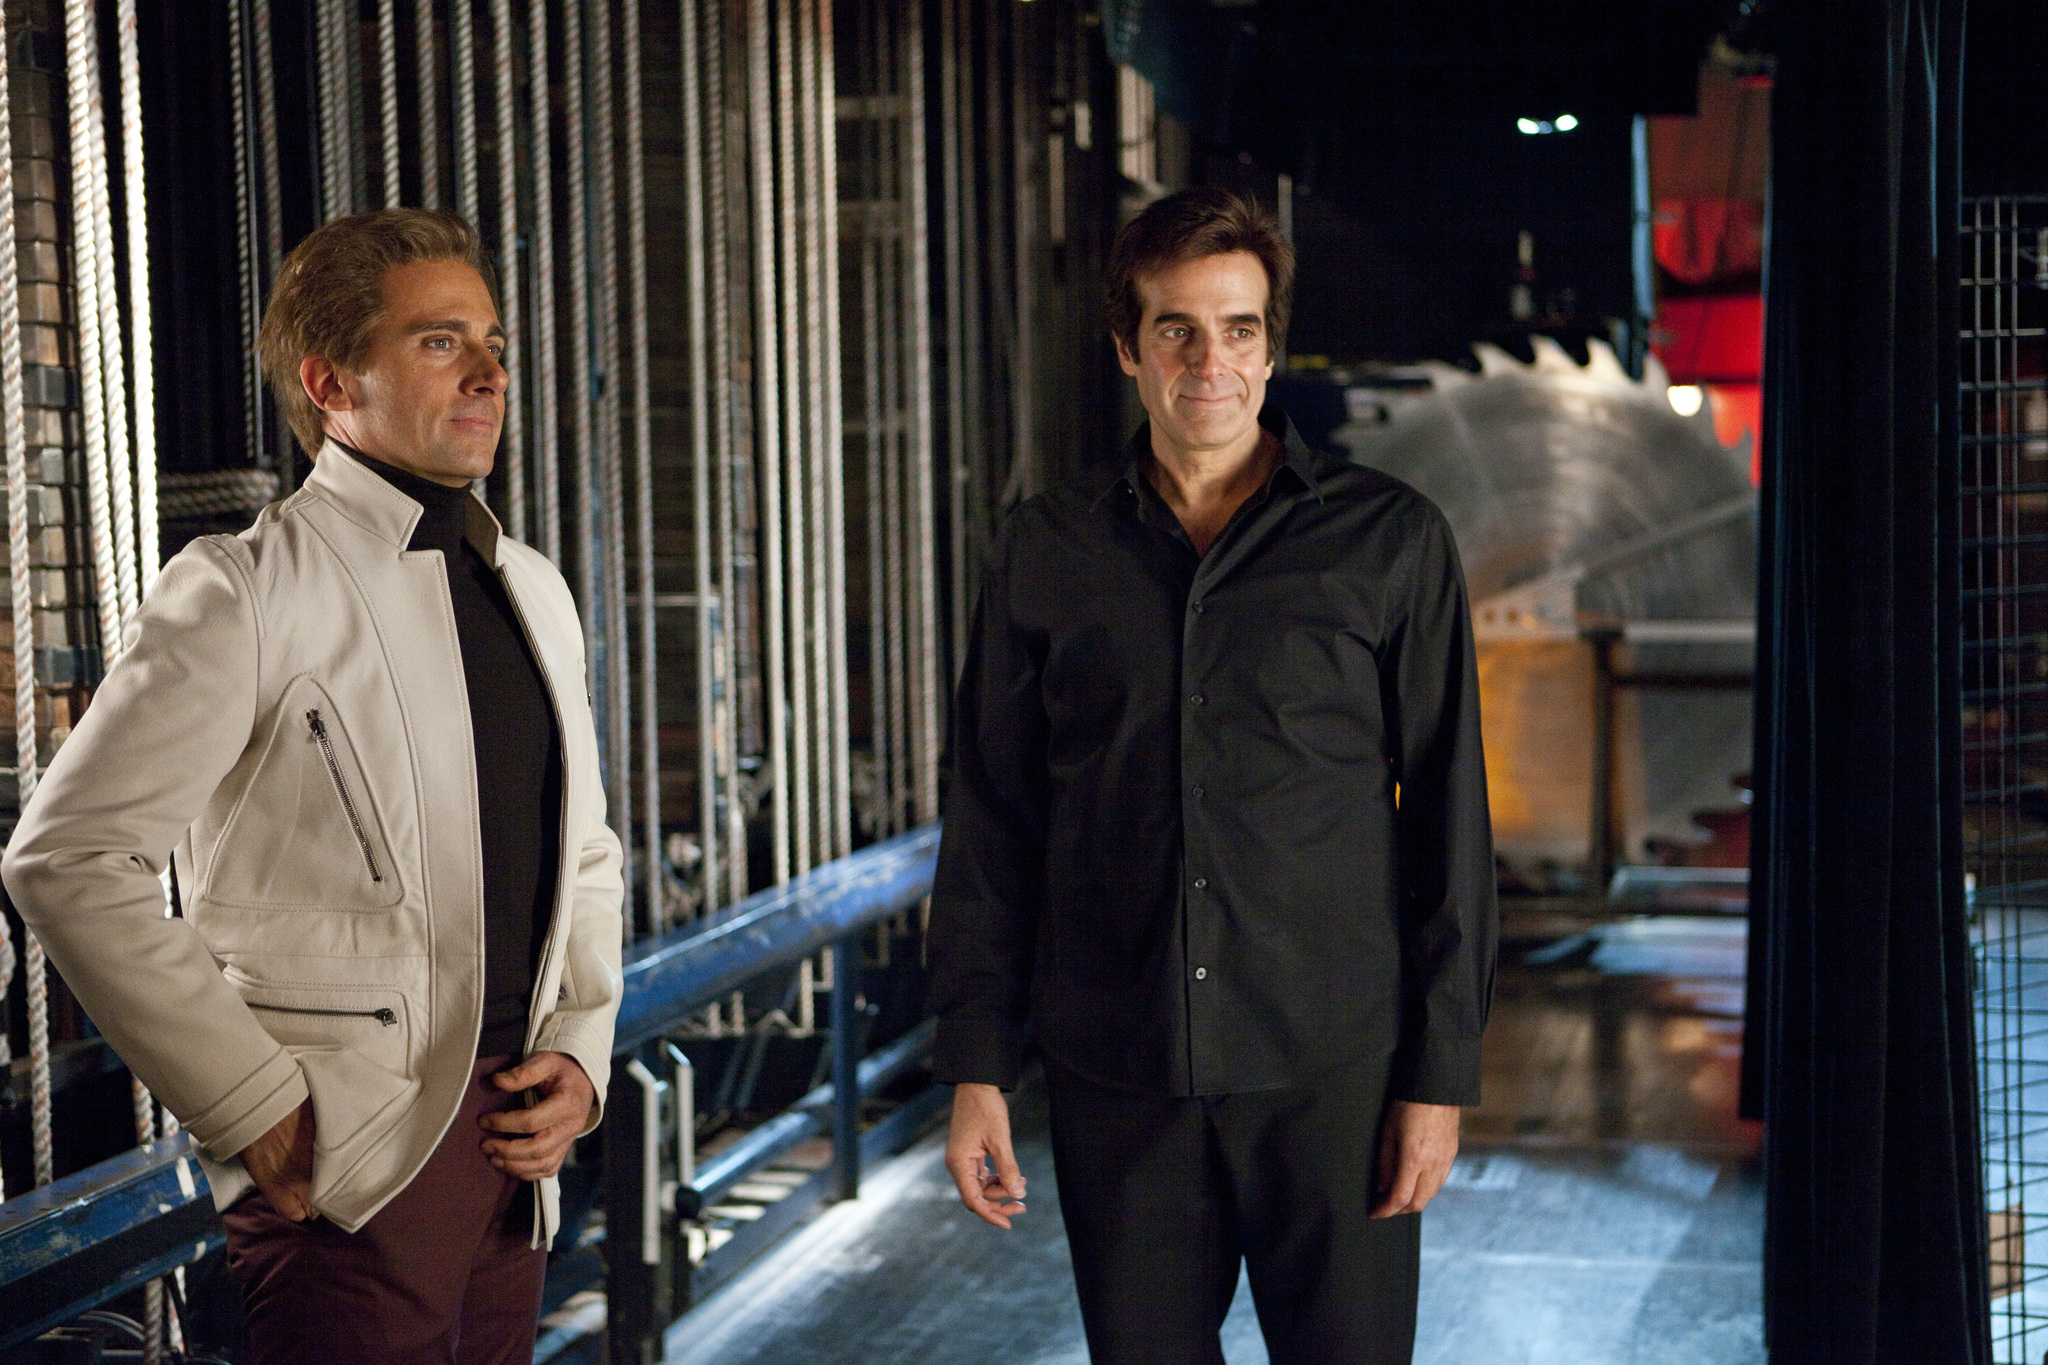 Still of David Copperfield and Steve Carell in The Incredible Burt Wonderstone (2013)